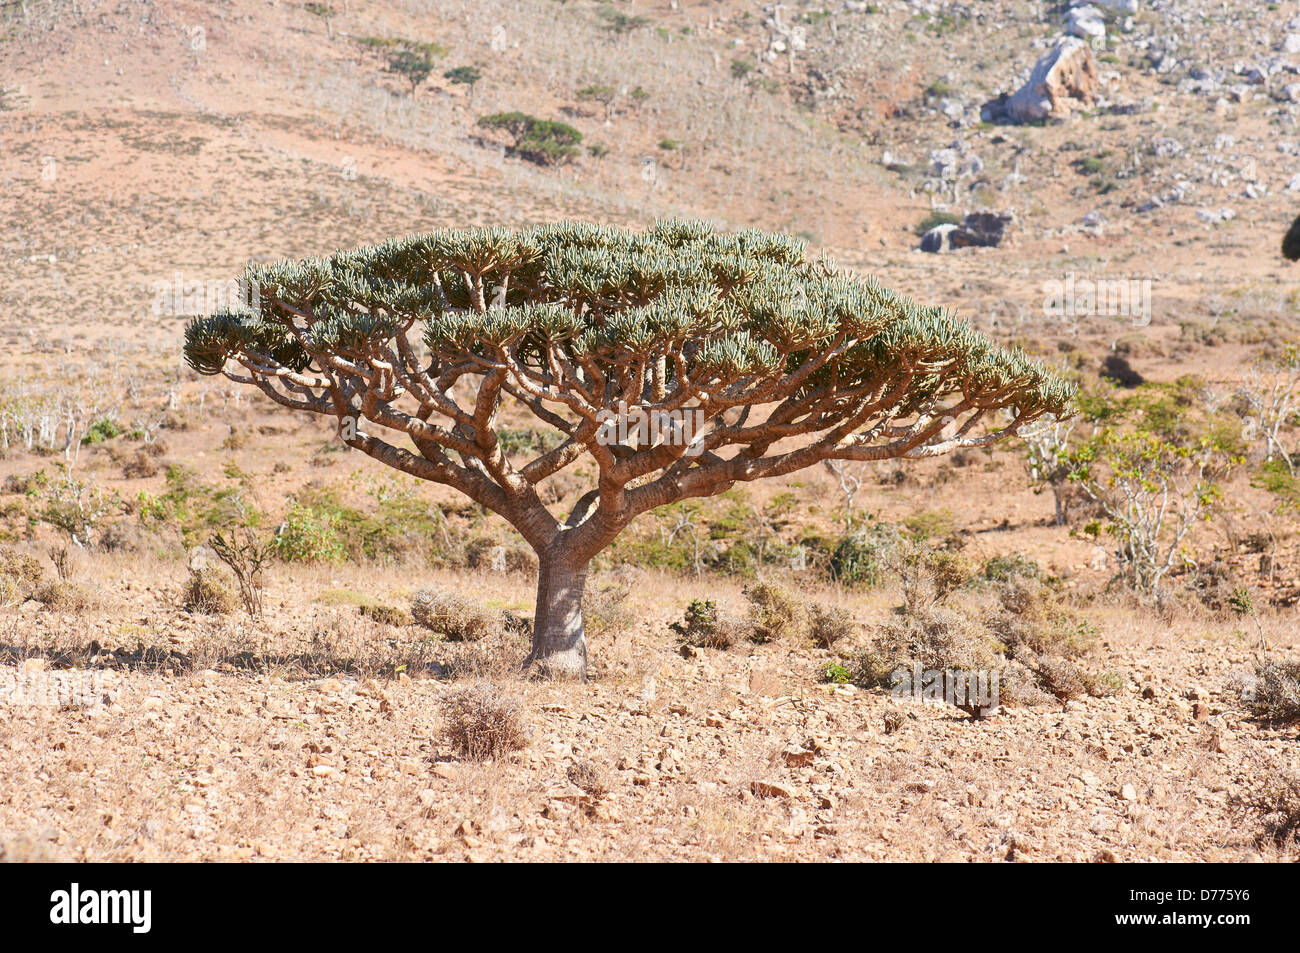 the endemic Euphorbia species on the island of Socotra Stock Photo